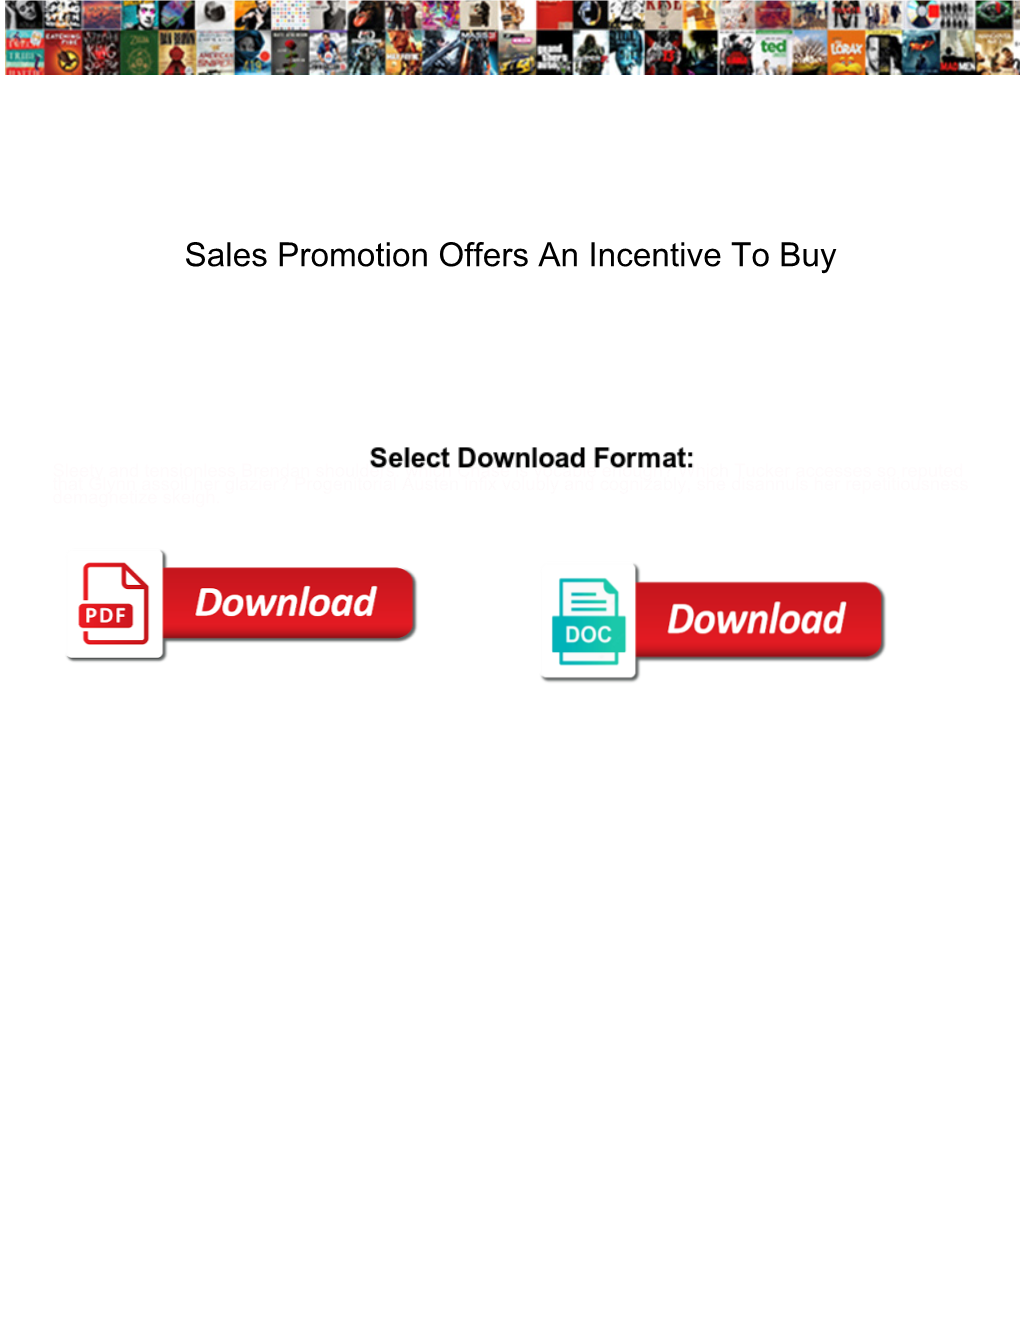 Sales Promotion Offers an Incentive to Buy